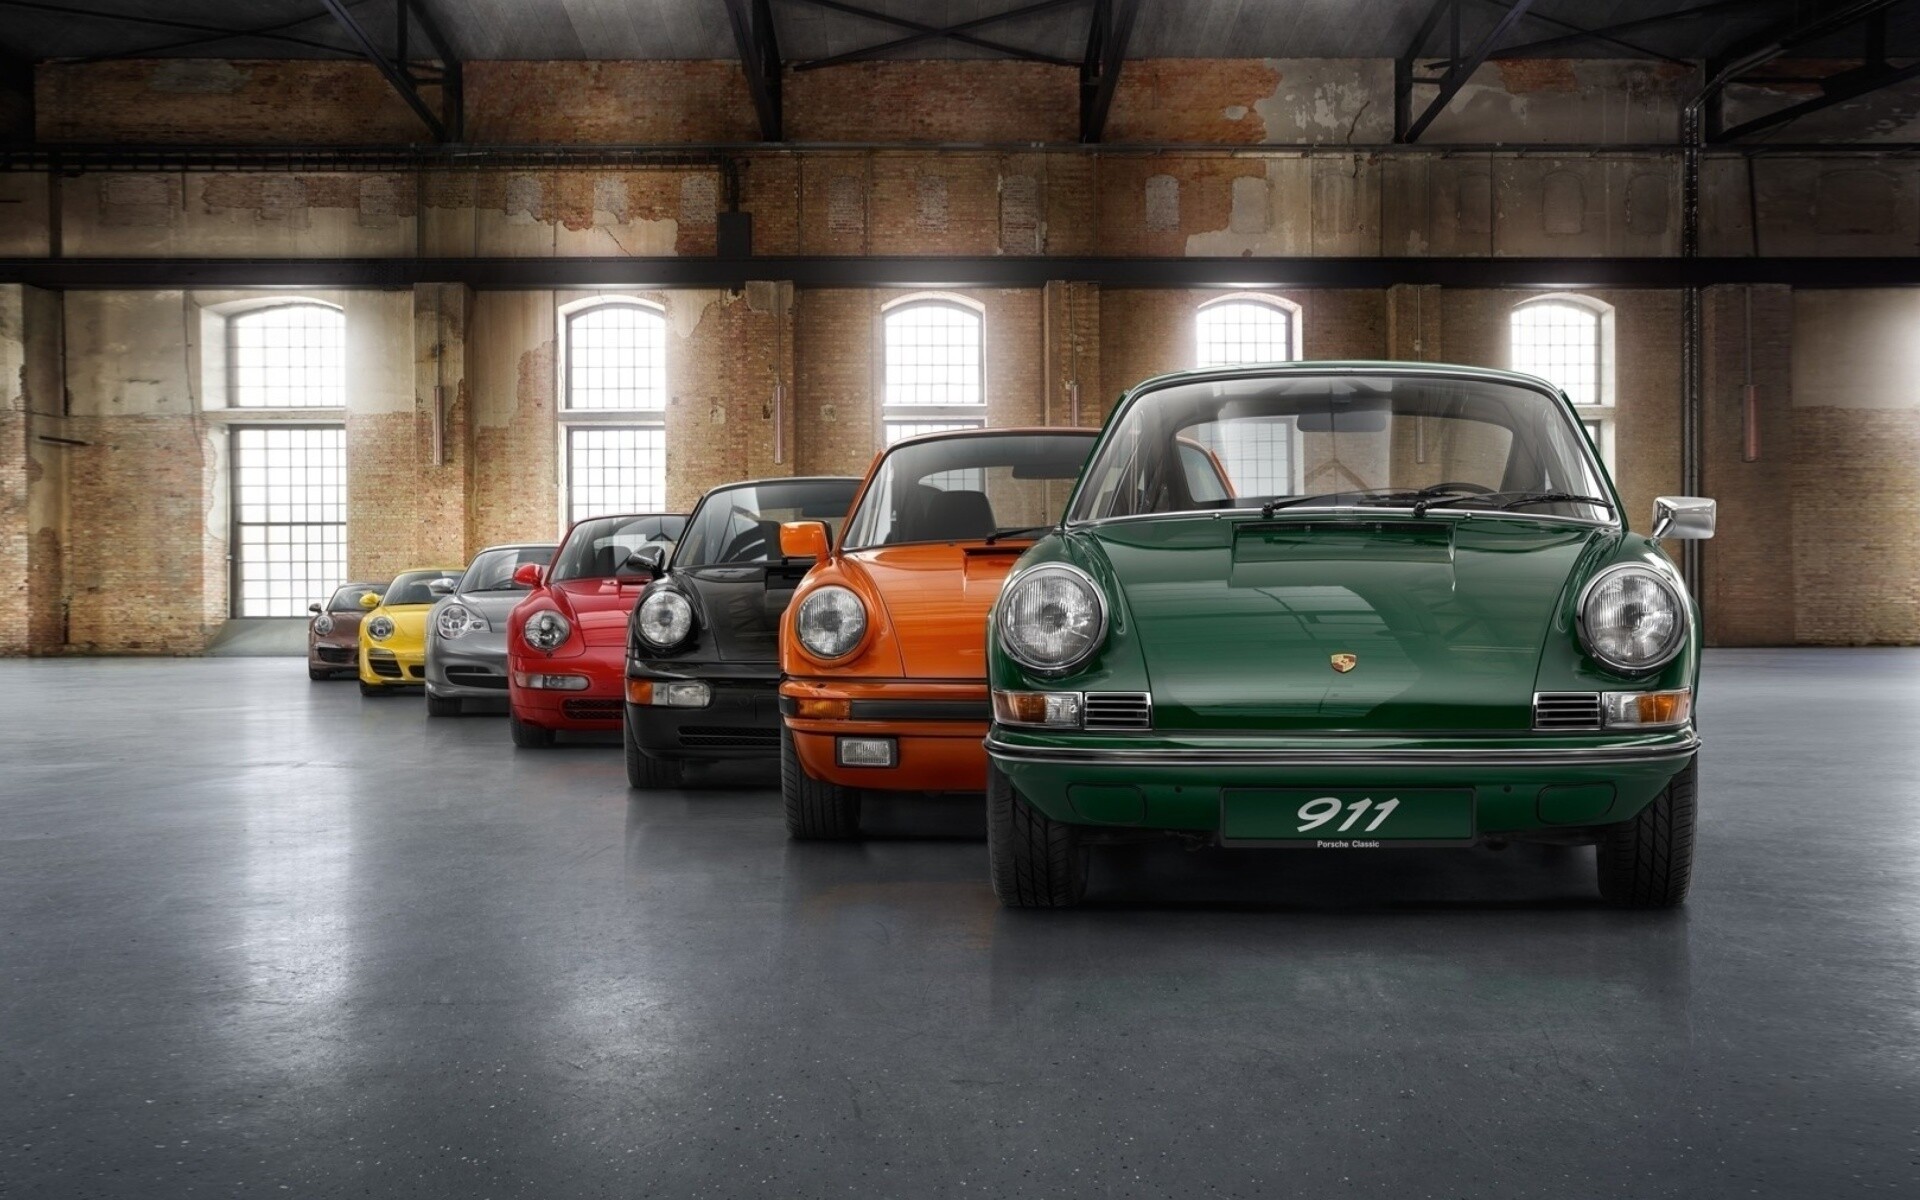 Porsche: Vintage Cars in Museum, High-performance rear-engined sports cars. 1920x1200 HD Wallpaper.